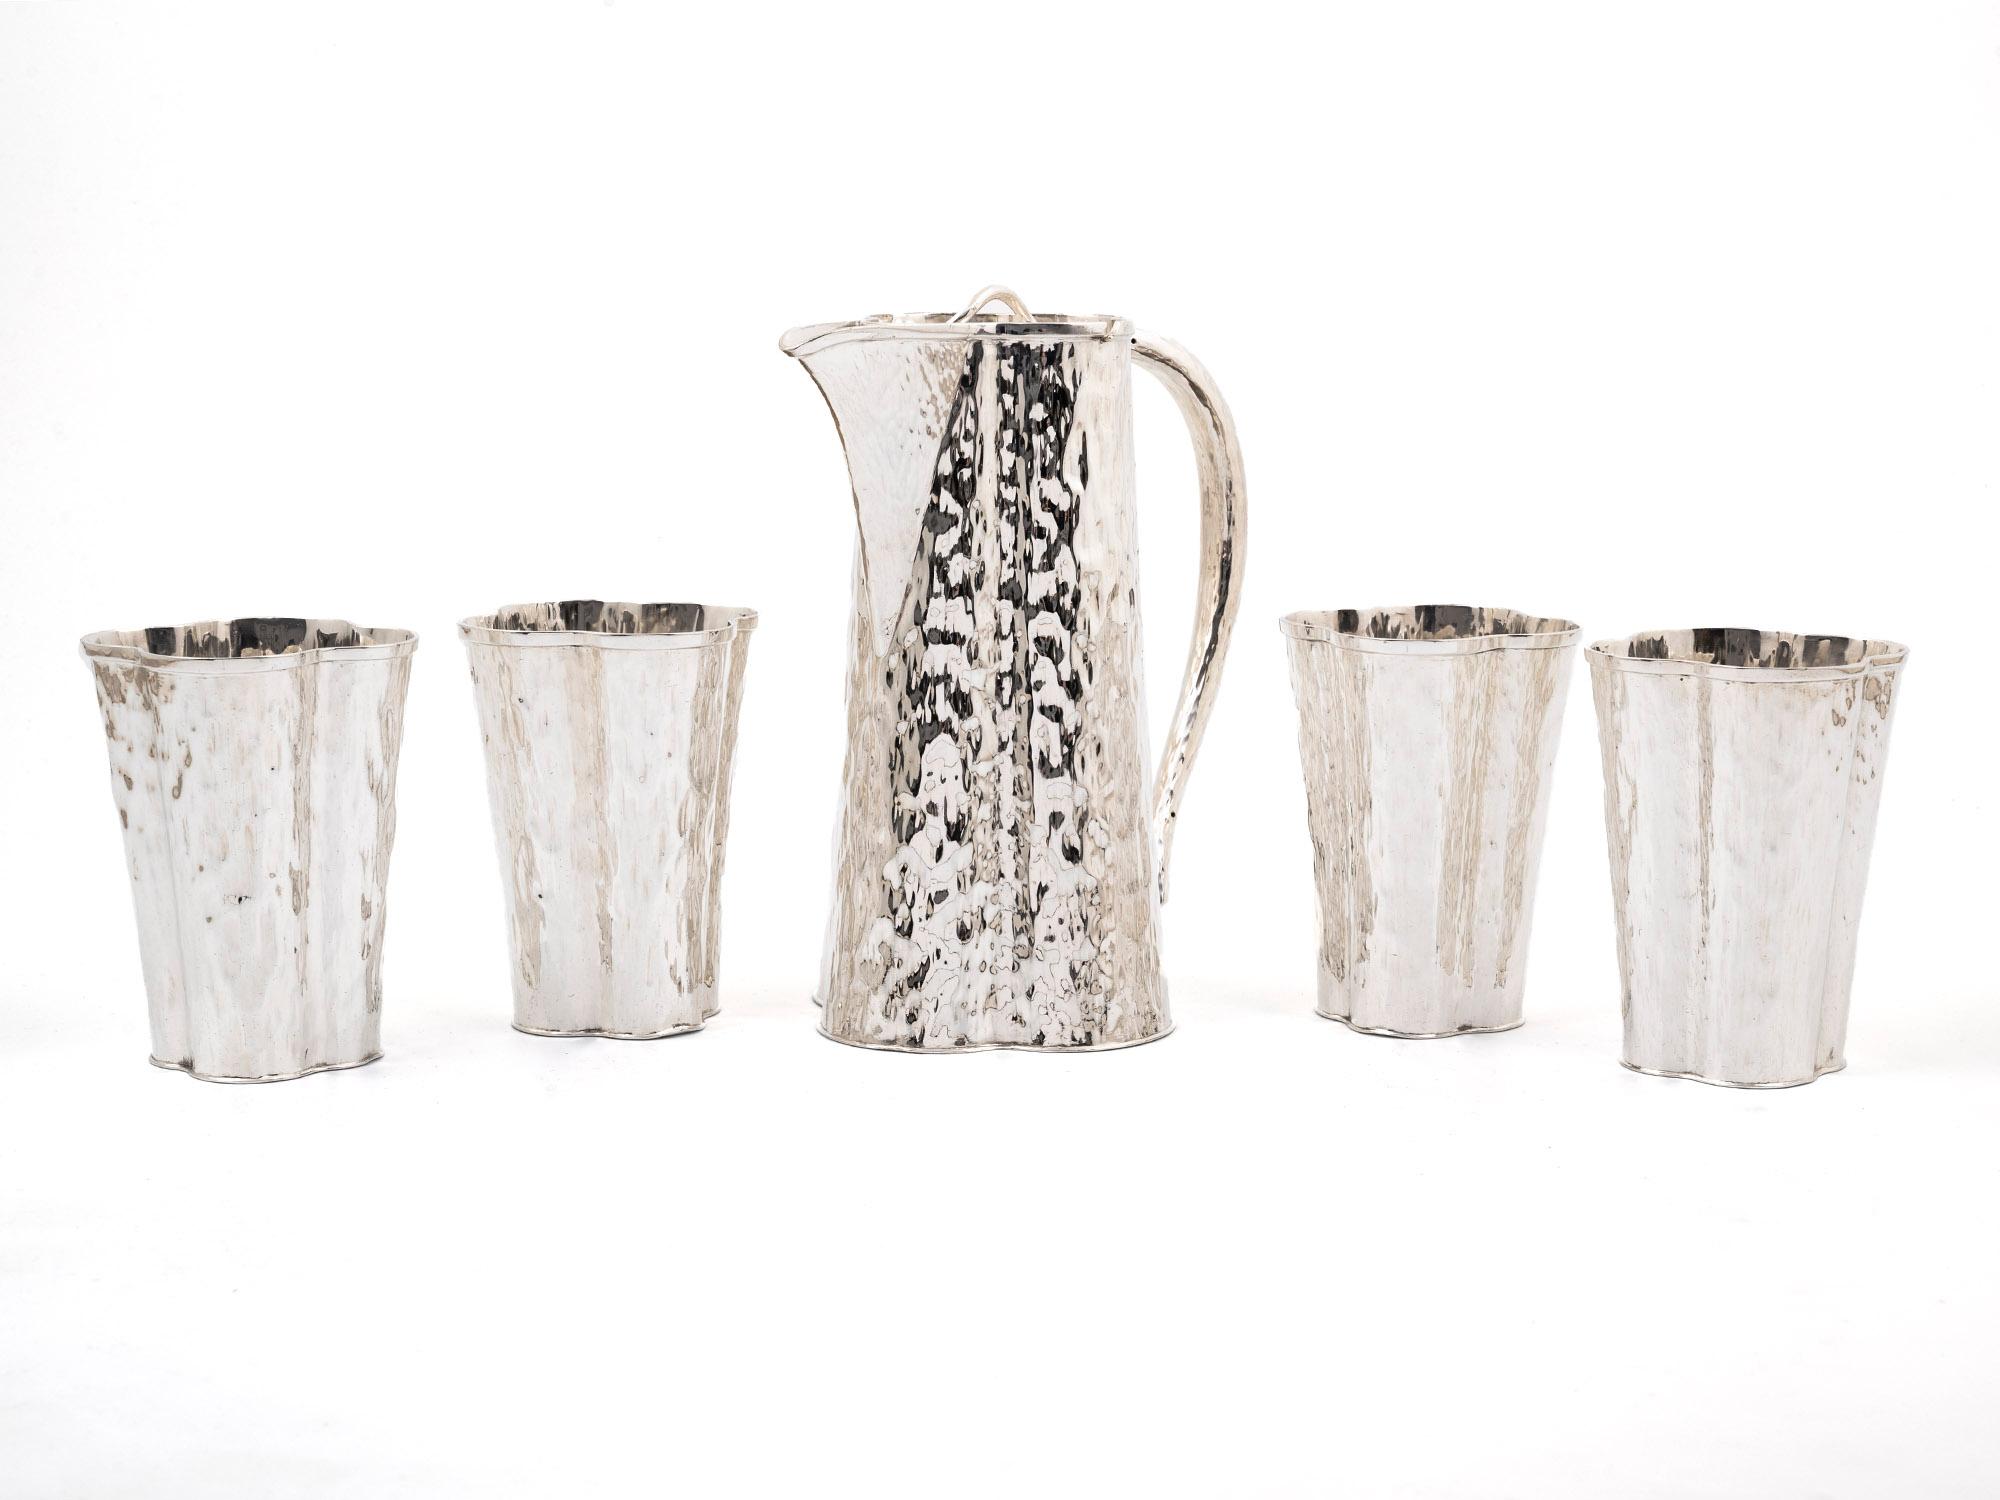 Stunning set of Silver plate quatrefoil beakers and jug by Birmingham silversmith Hukin & Heath. With a chipped bark design, each item is stamped on the base.

A wonderfully decorative and functional piece by Hukin & Heath.

Dimensions:
Jug H